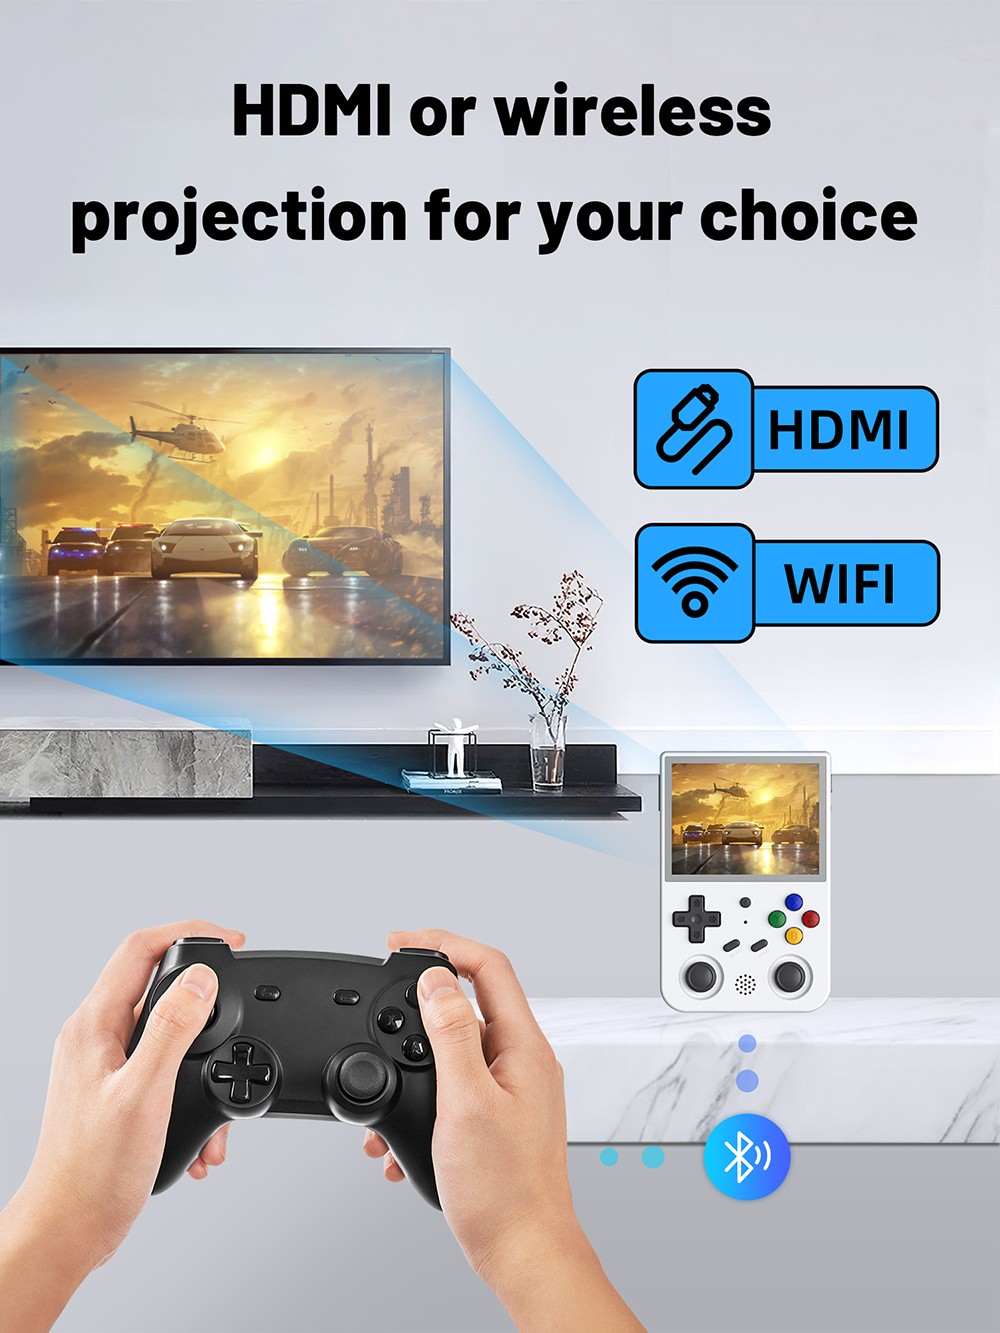 ANBERNIC RG353V Portable Game Console Android 32GB eMMC+16GB Linux+256GB Game TF Card 3.5'' IPS Retro WiFi Bluetooth